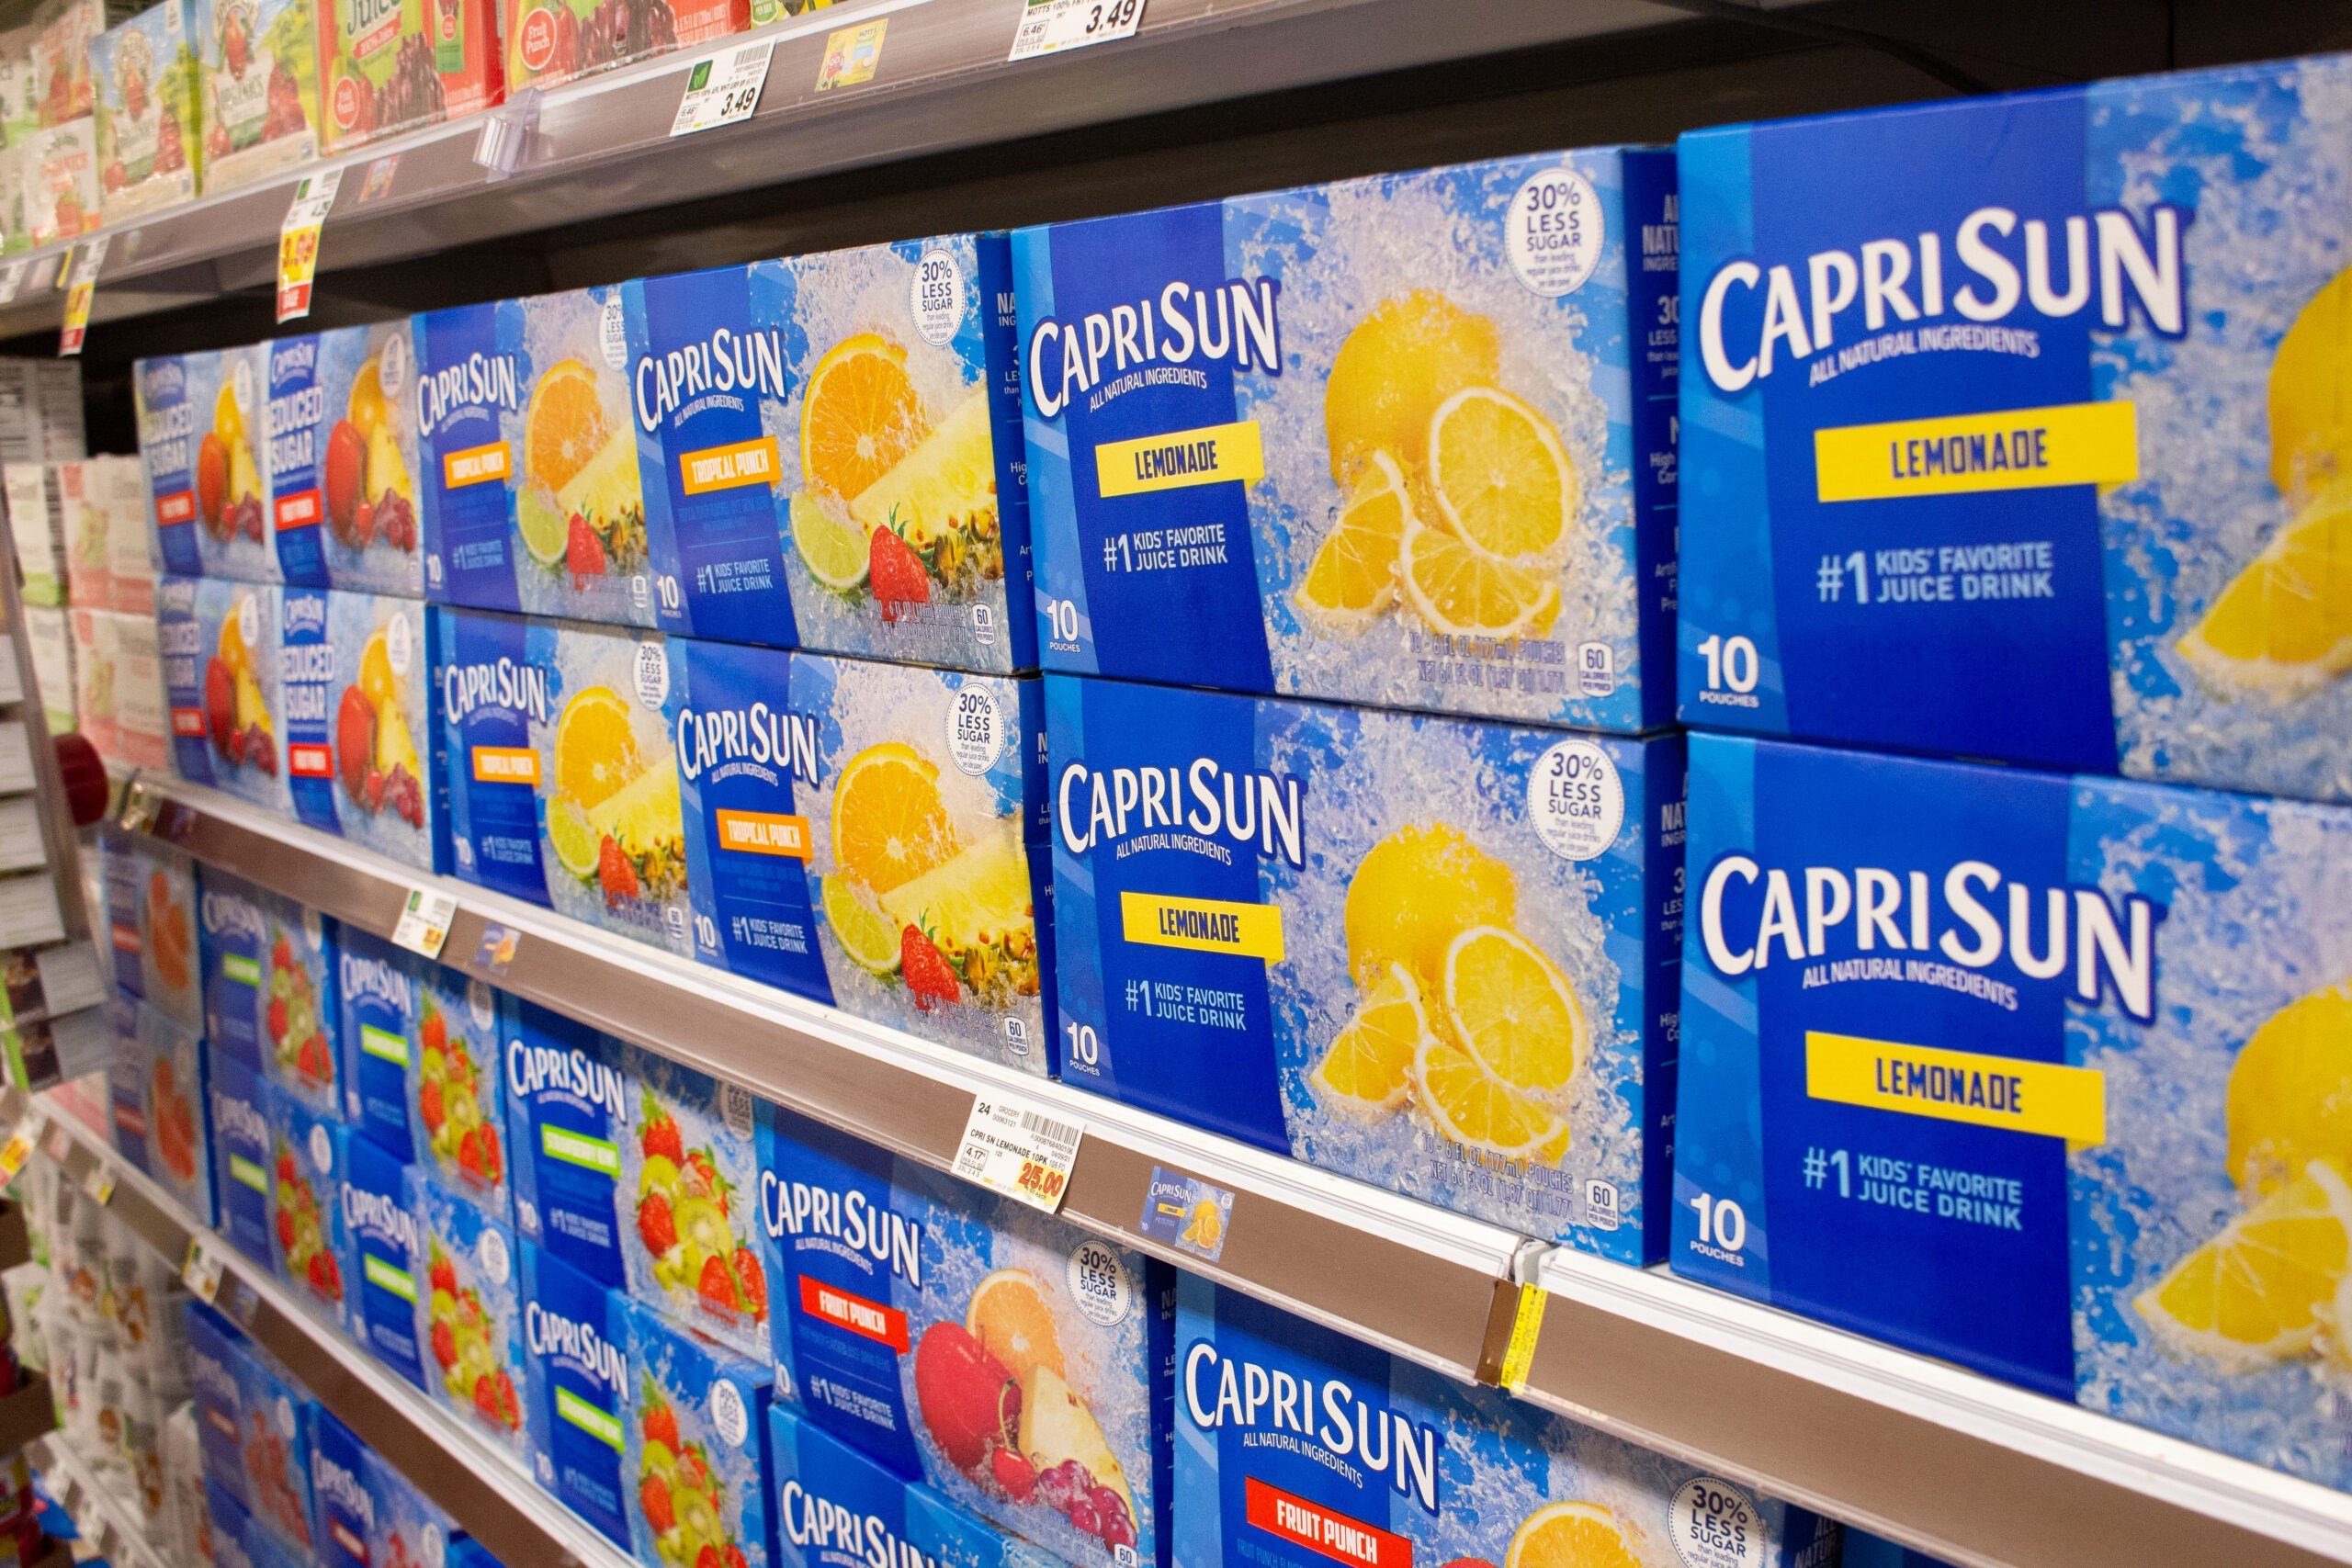 Thousands Of Capri Sun Cases Recalled Over Potential Cleaning Solution Contamination Kake